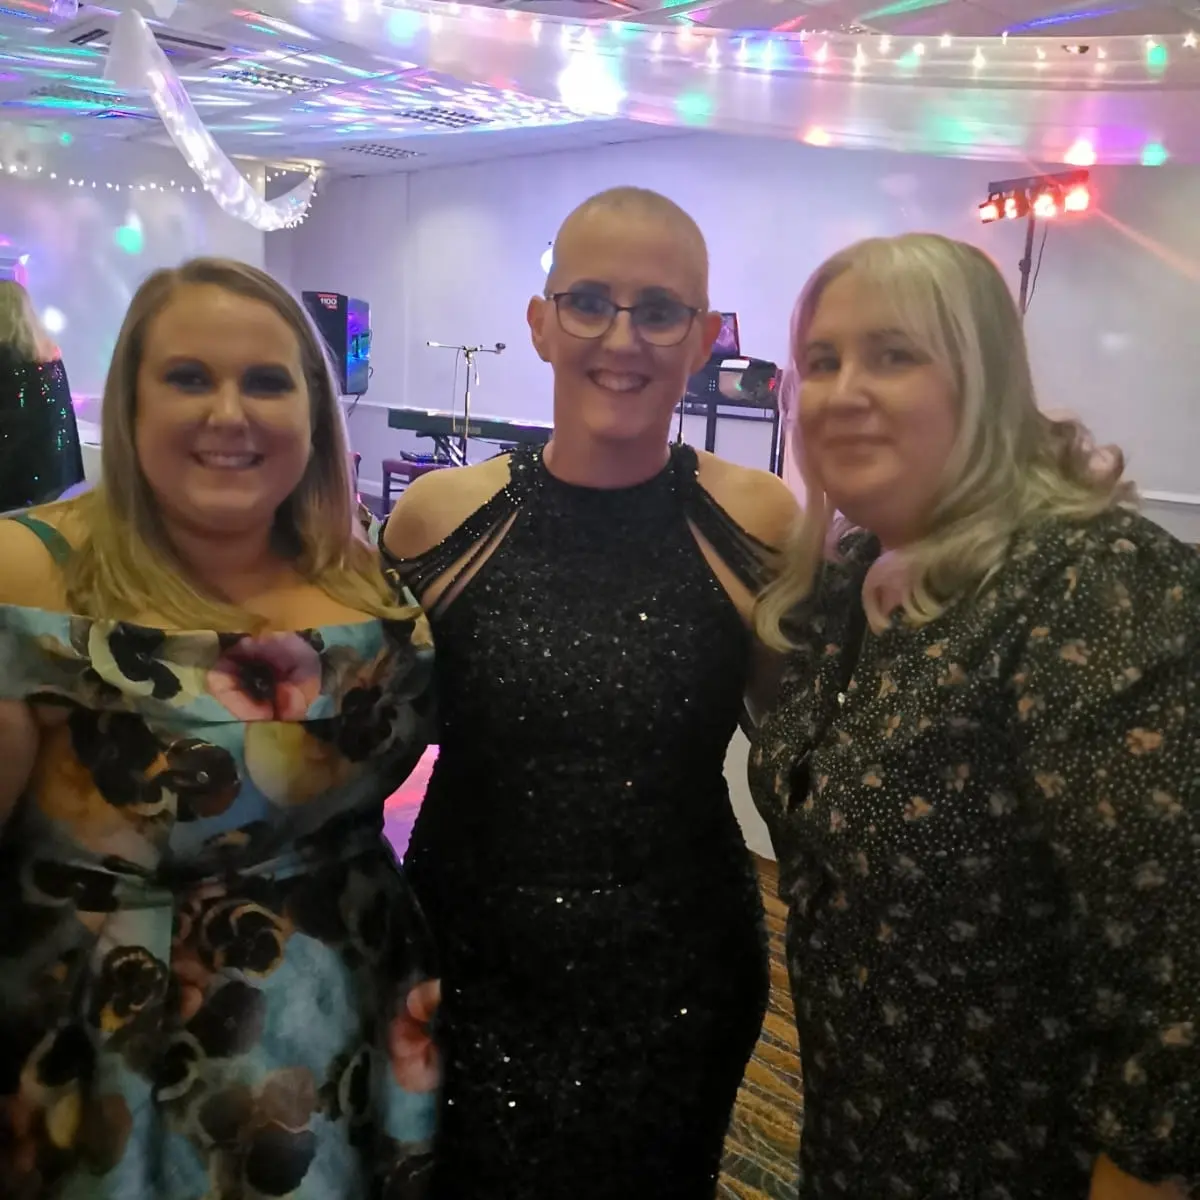 Kelly Barker (centre) with Halton unit manager Laura Selby (left) and a colleague (right). They are all dressed in glamorous evening dresses and are at Kelly's ball.